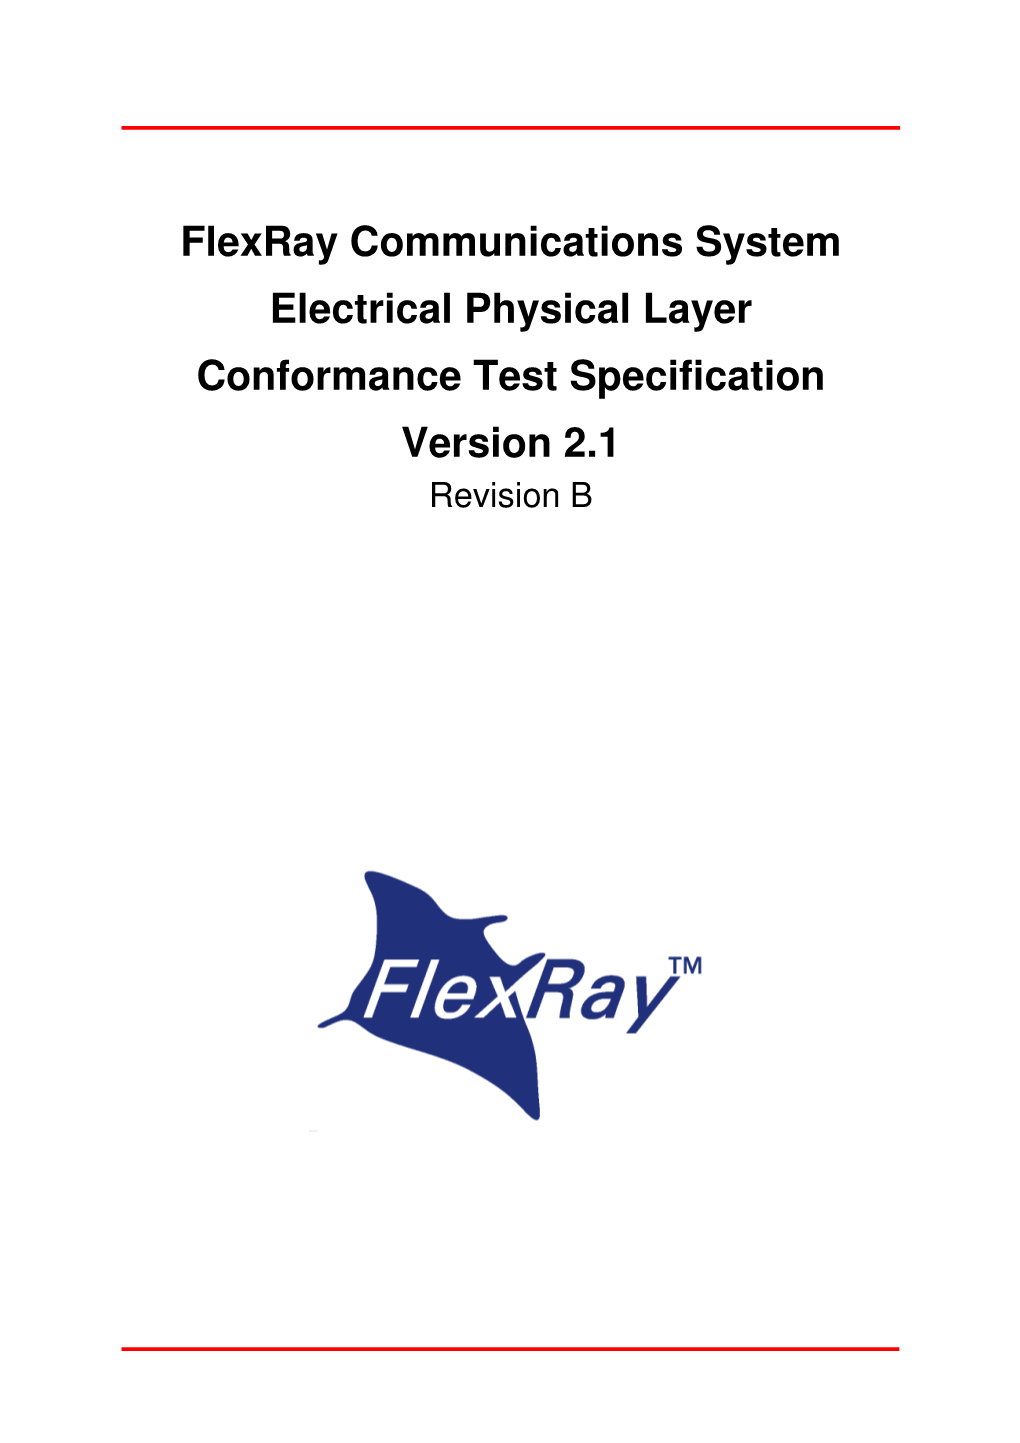 Flexray Communications System Electrical Physical Layer Conformance Test Specification Version 2.1 Revision B